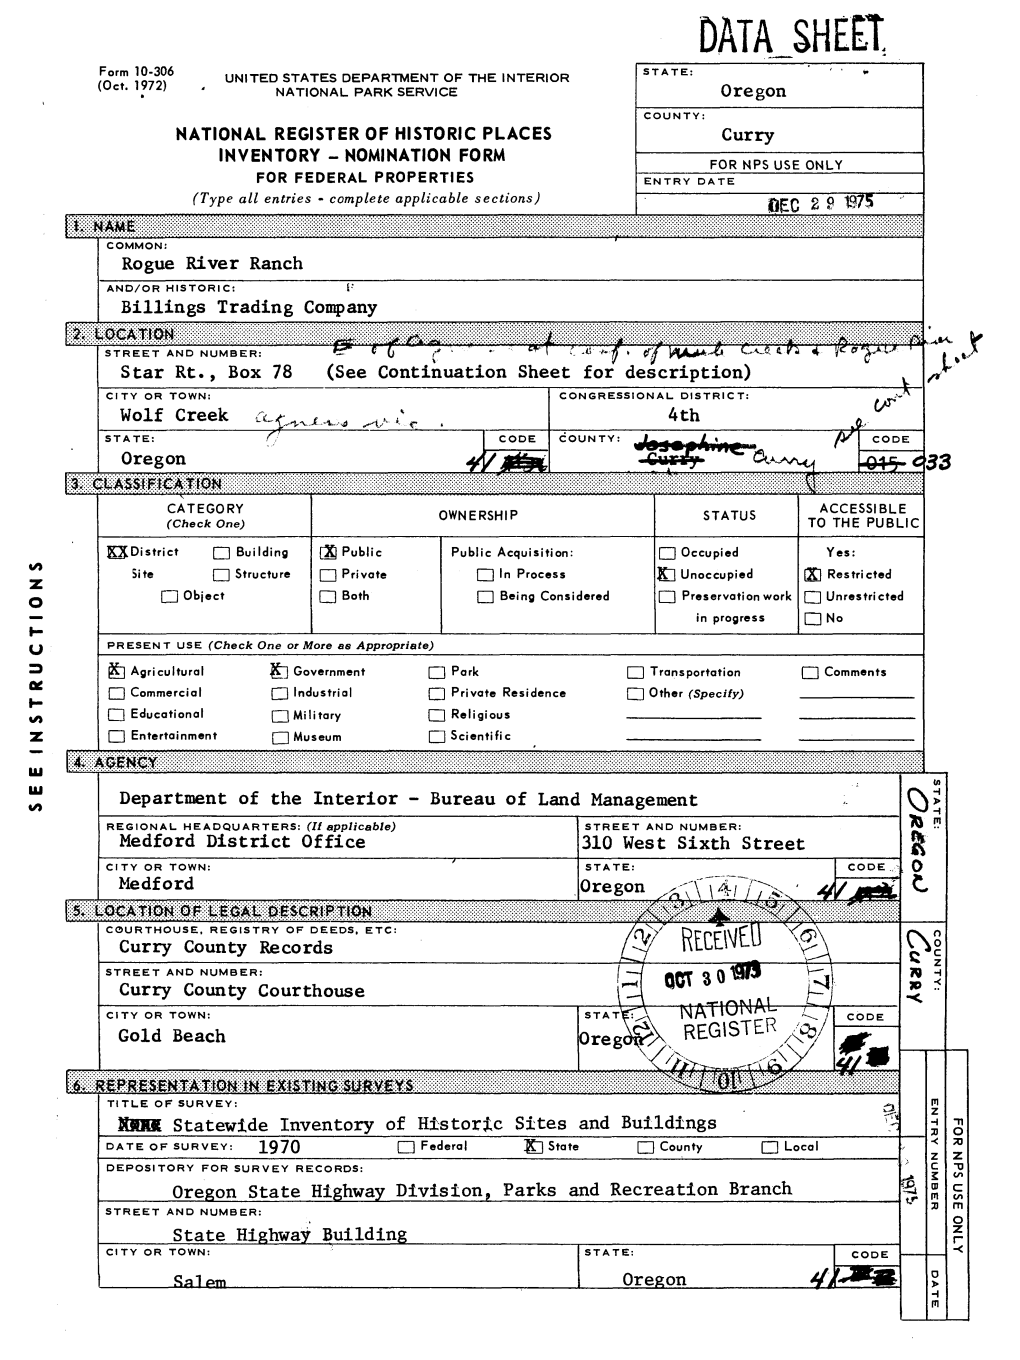 DATA SHEET, Form 10-306 UNITED STATES DEPARTMENT of the INTERIOR (Oct